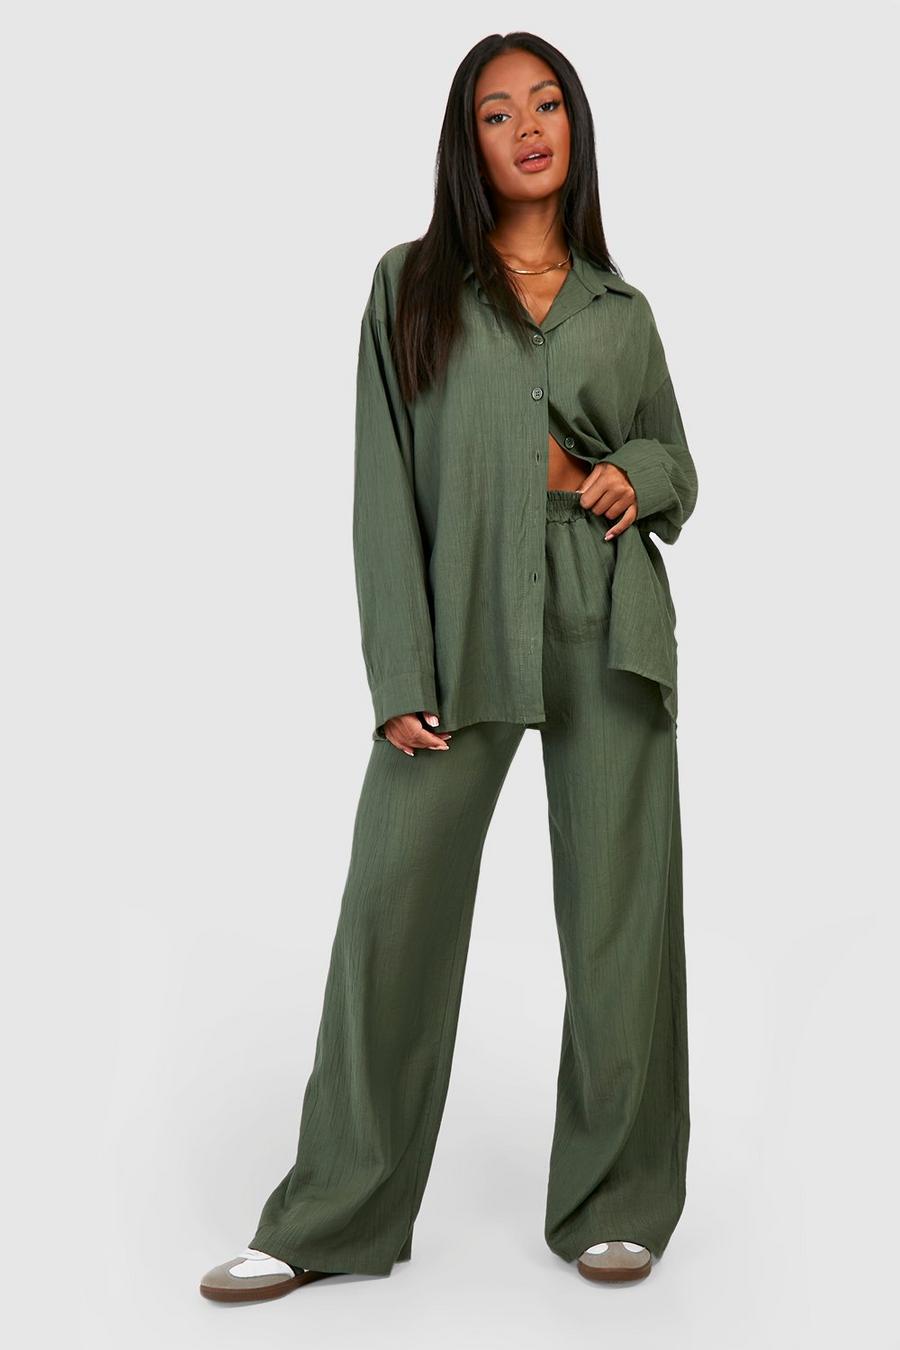 Khaki Crinkle Relaxed Fit Wide Leg Pants